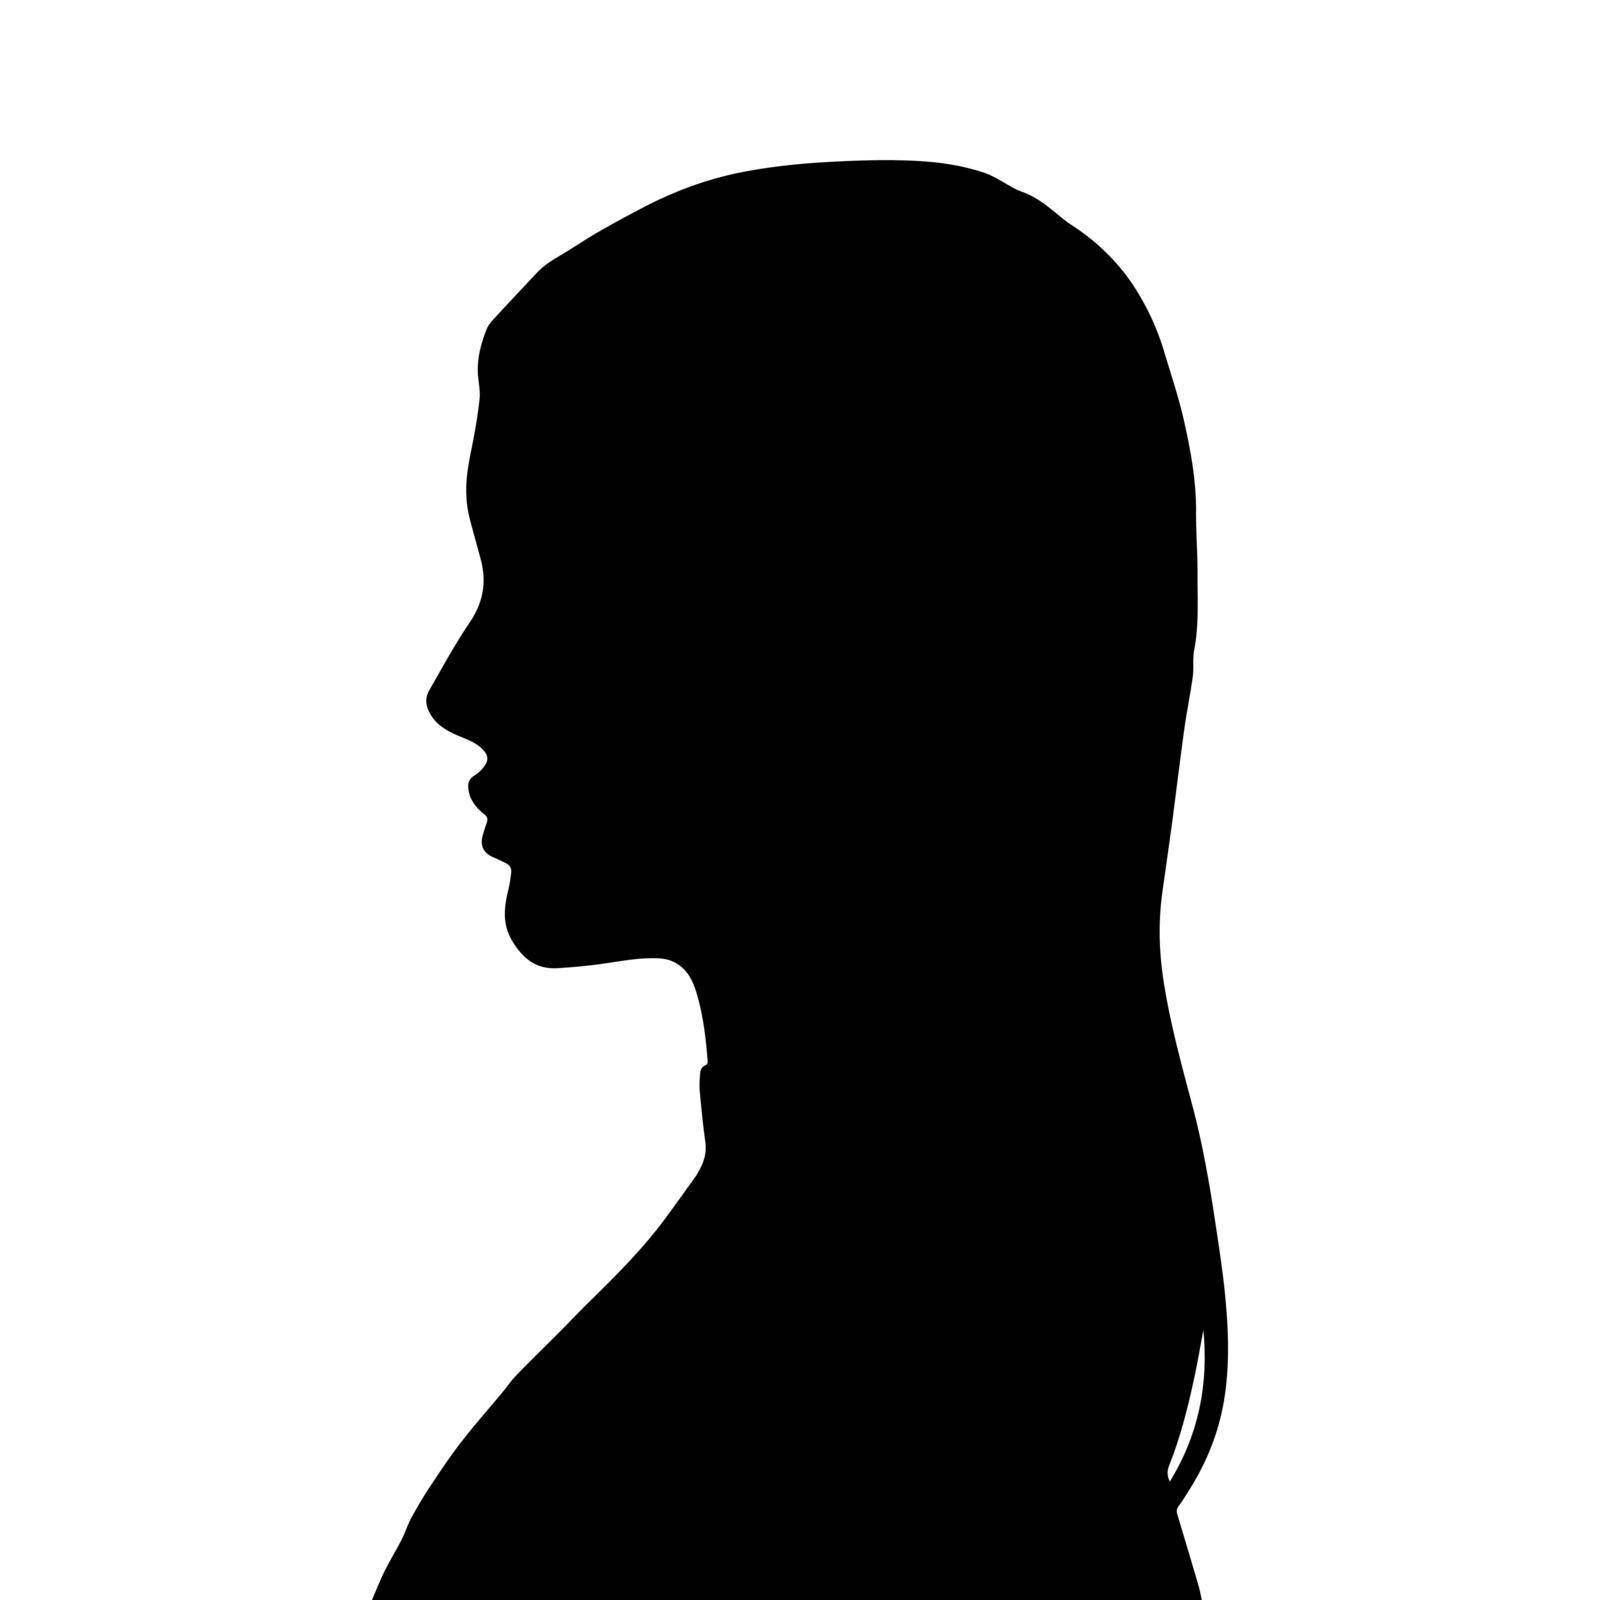 Woman Head Black and White Vector Silhouette. Beautiful Girl Fashionable Haircut style. Simple Elegant Woman Silhouette Icon Isolated. Vector illustration